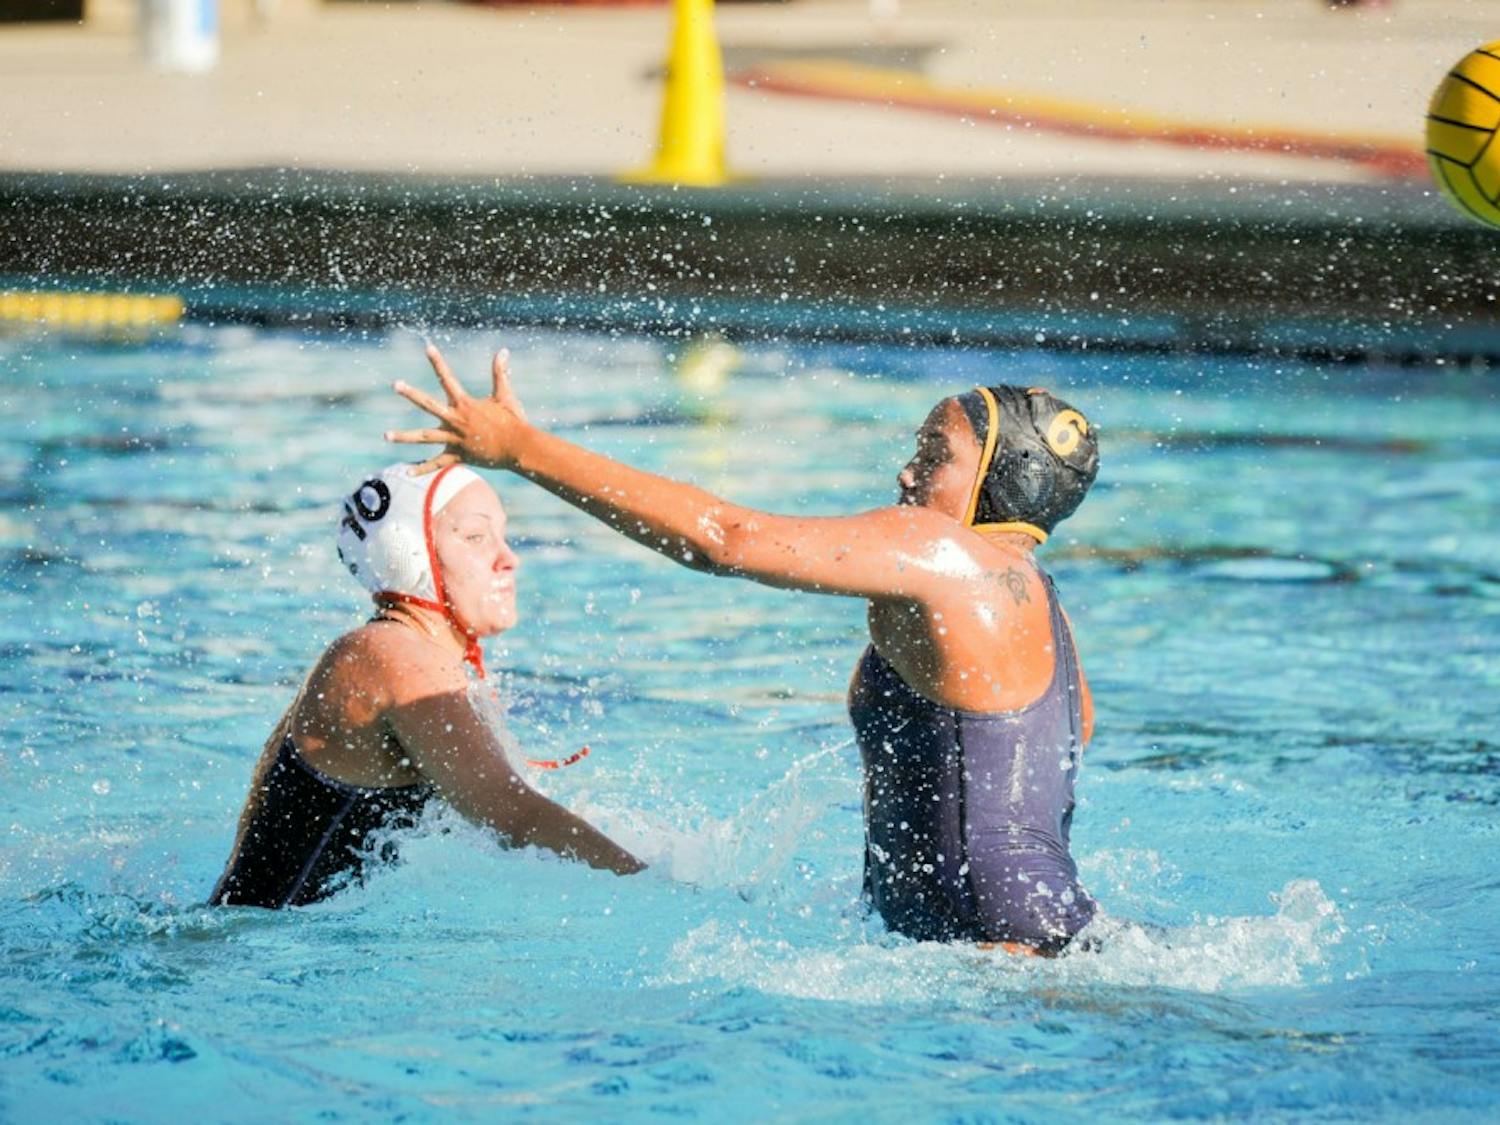 Sophomore Taylor Bertrand tries to block a pass in a match against University of Pacific on&nbsp;Sunday, March 20, 2016 at the Mona Plummer Aquatic Complex in Tempe, AZ. ASU water polo won 5-3.